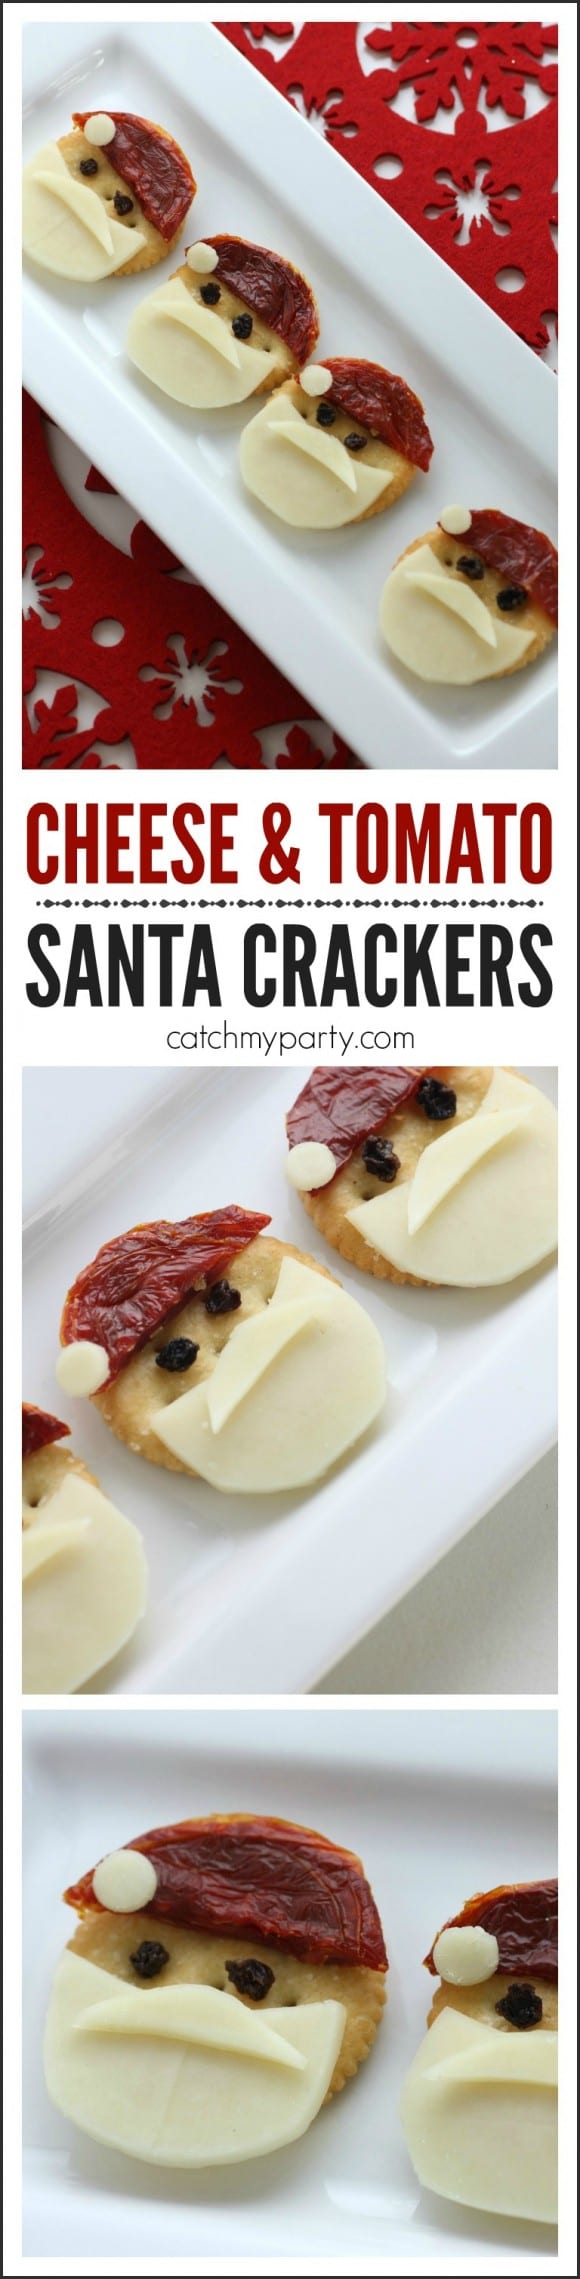 Easy Christmas Santa Crackers with Cheese and Tomato! | CatchMyParty.com